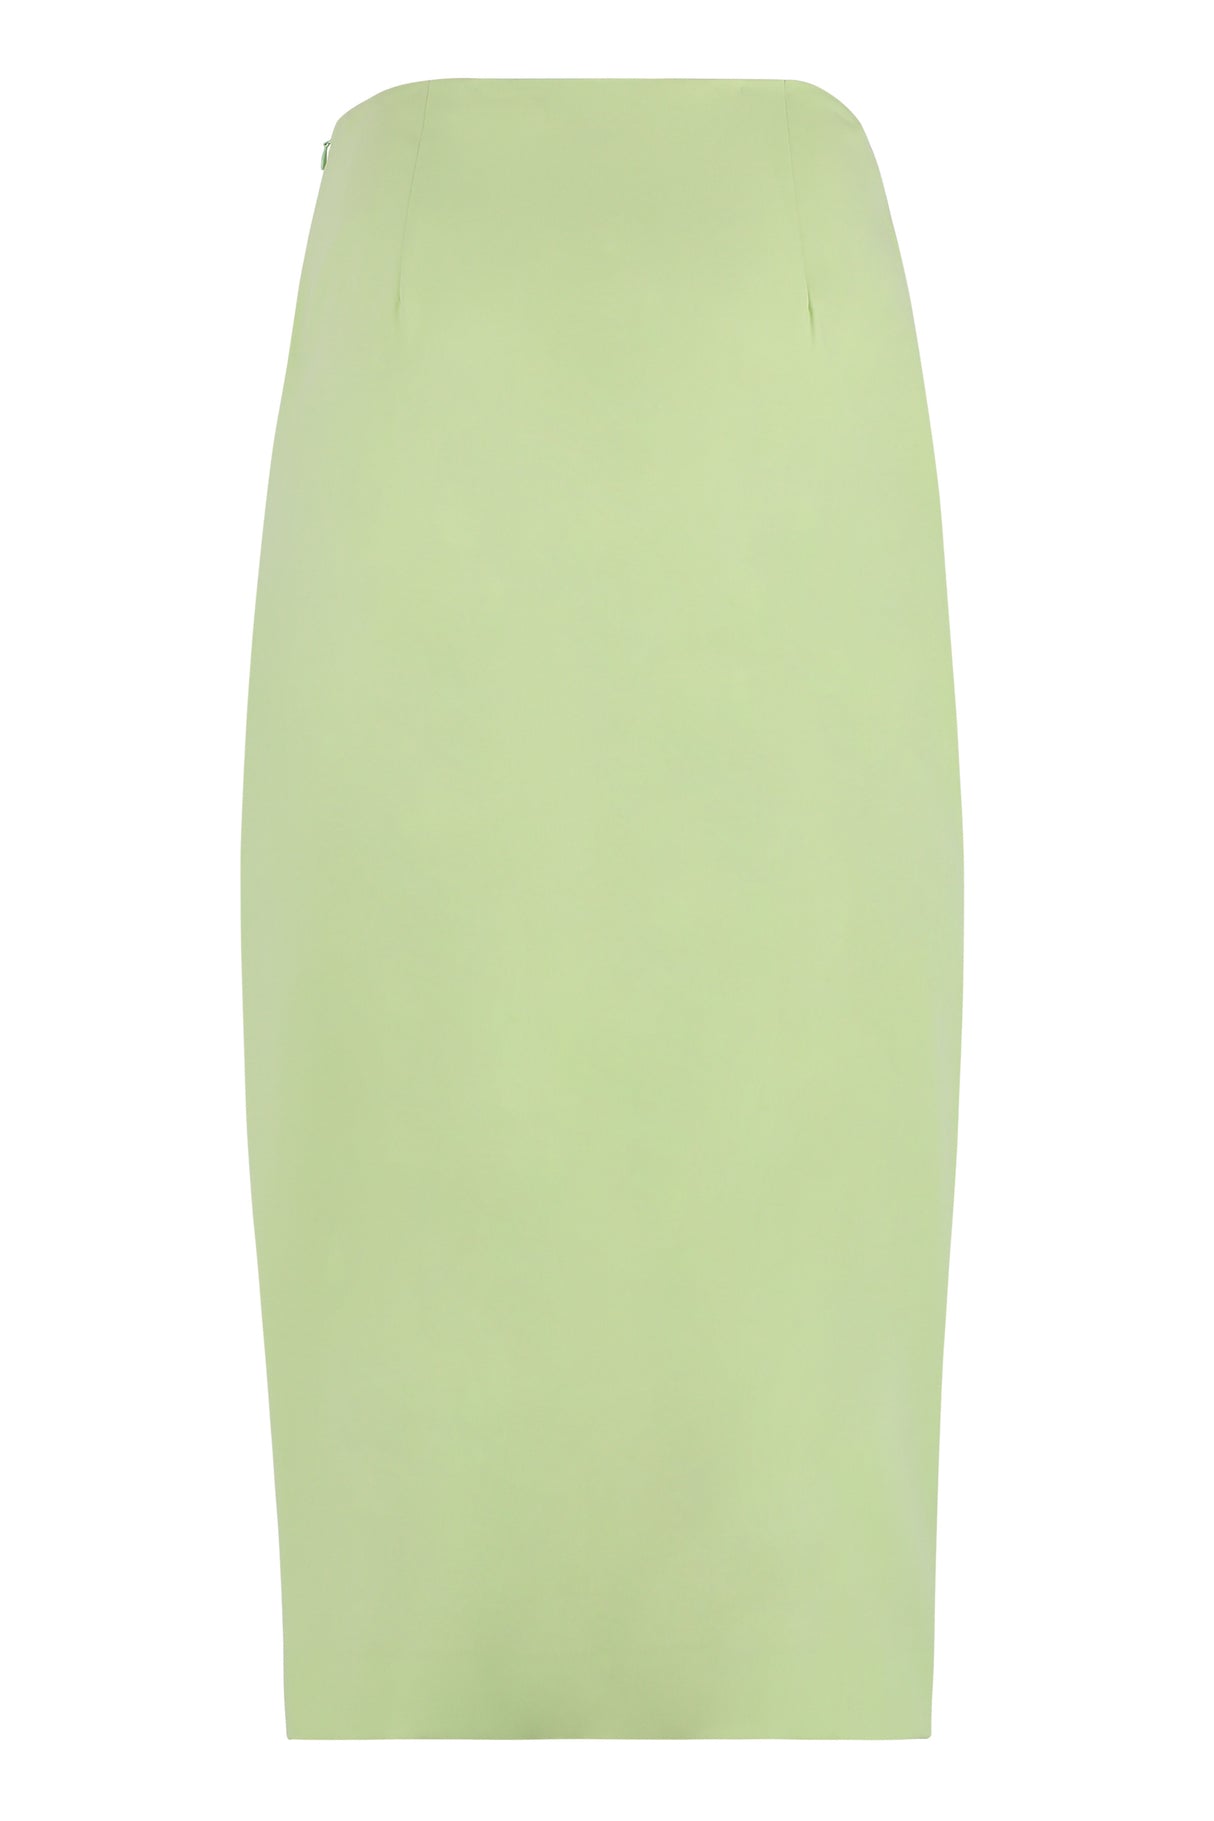 TORY BURCH Satin Wrap Skirt for Women in Green, SS23 Collection